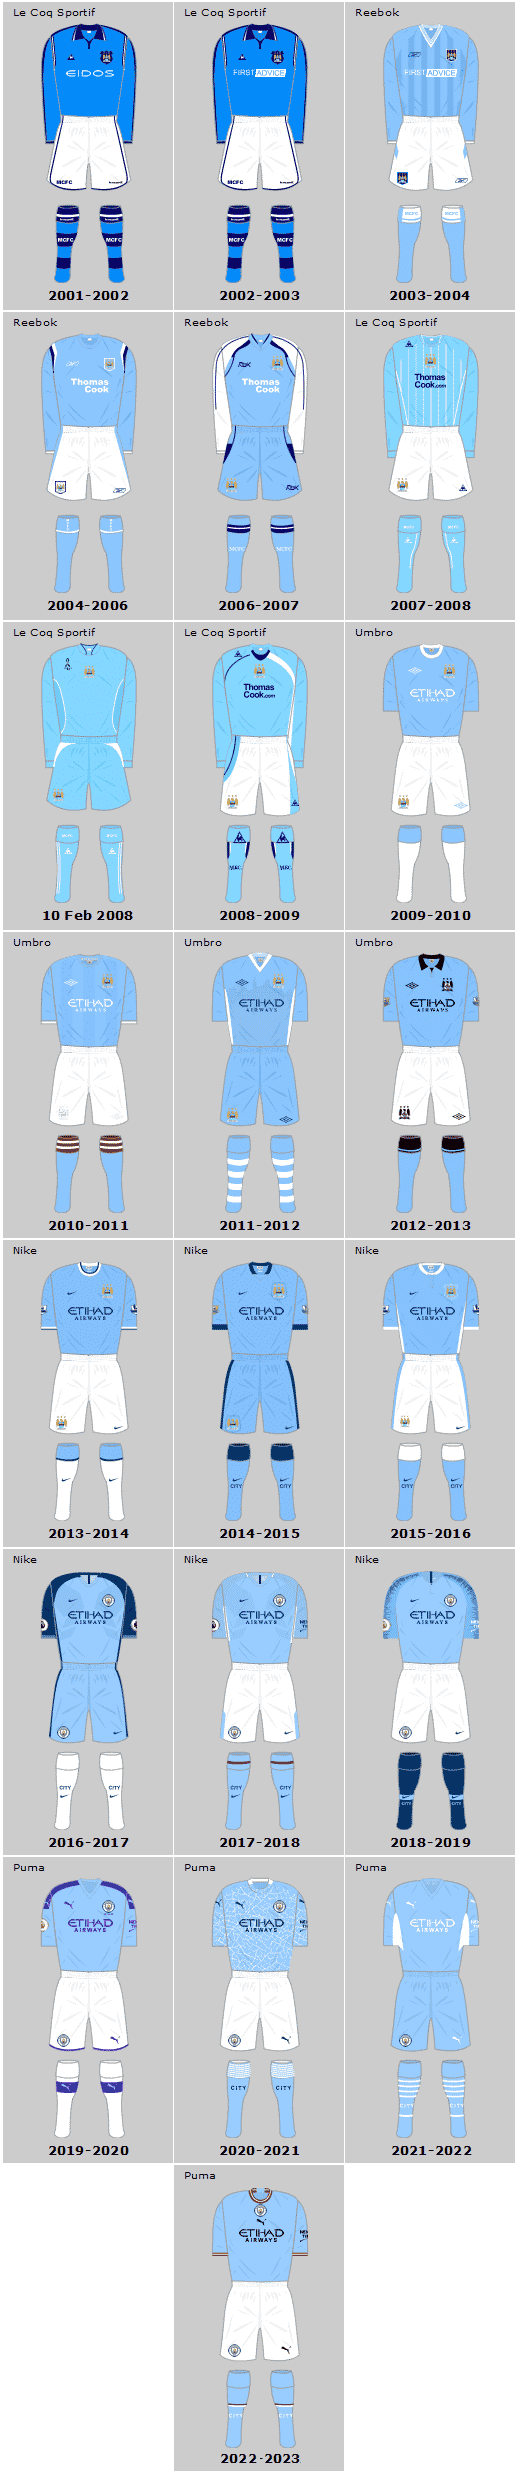 Manchester City 21st Century Home Playing Kits